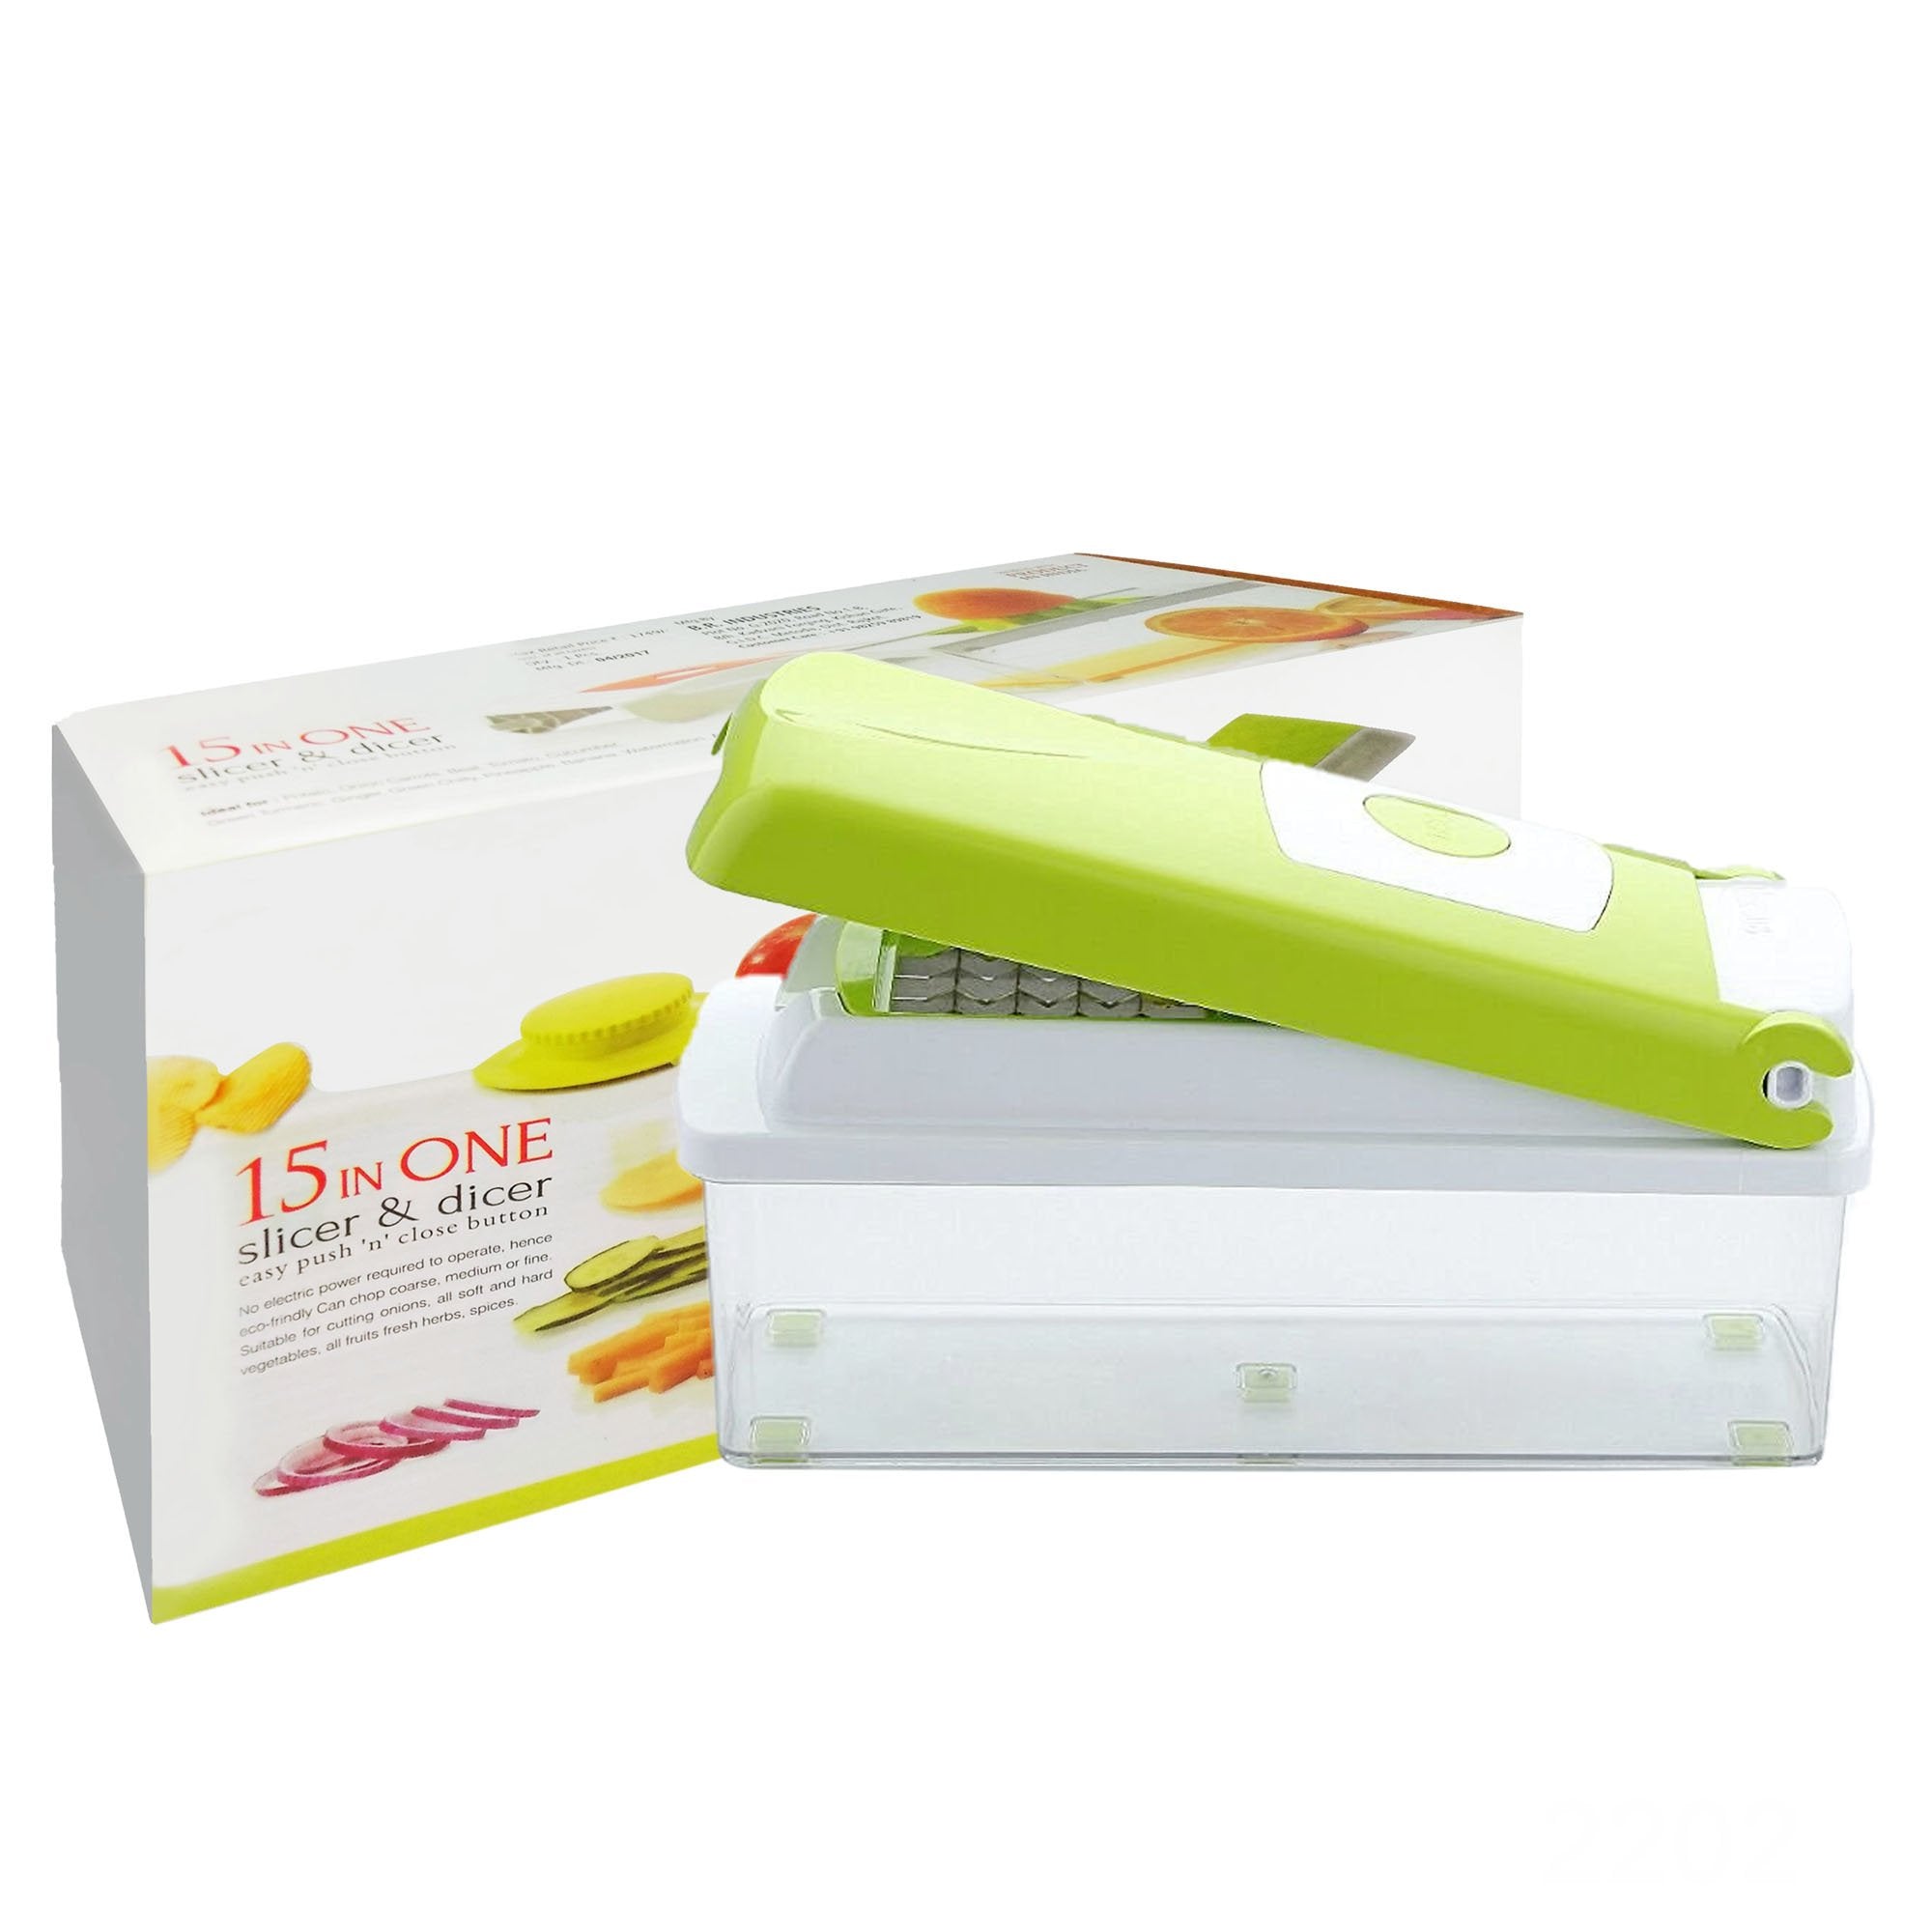 2202 Plastic Big 15 in 1 Dicer with Cutter with easy Push and pull Button - SkyShopy